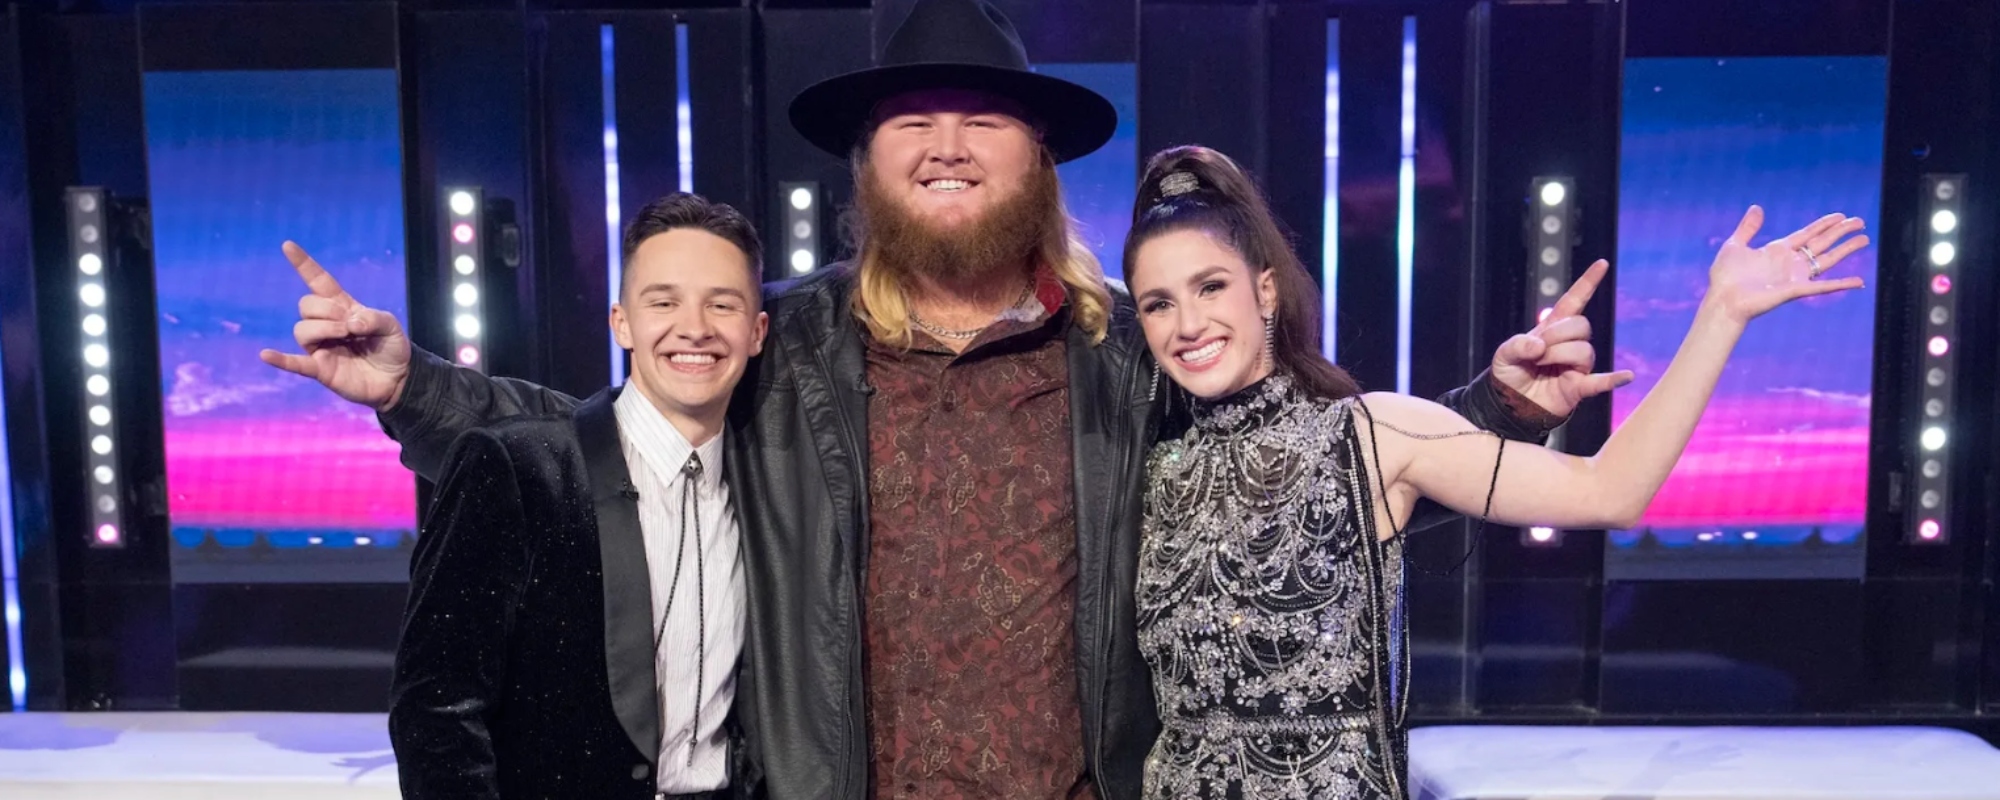 Here Is How to Vote For 'American Idol' Top 3